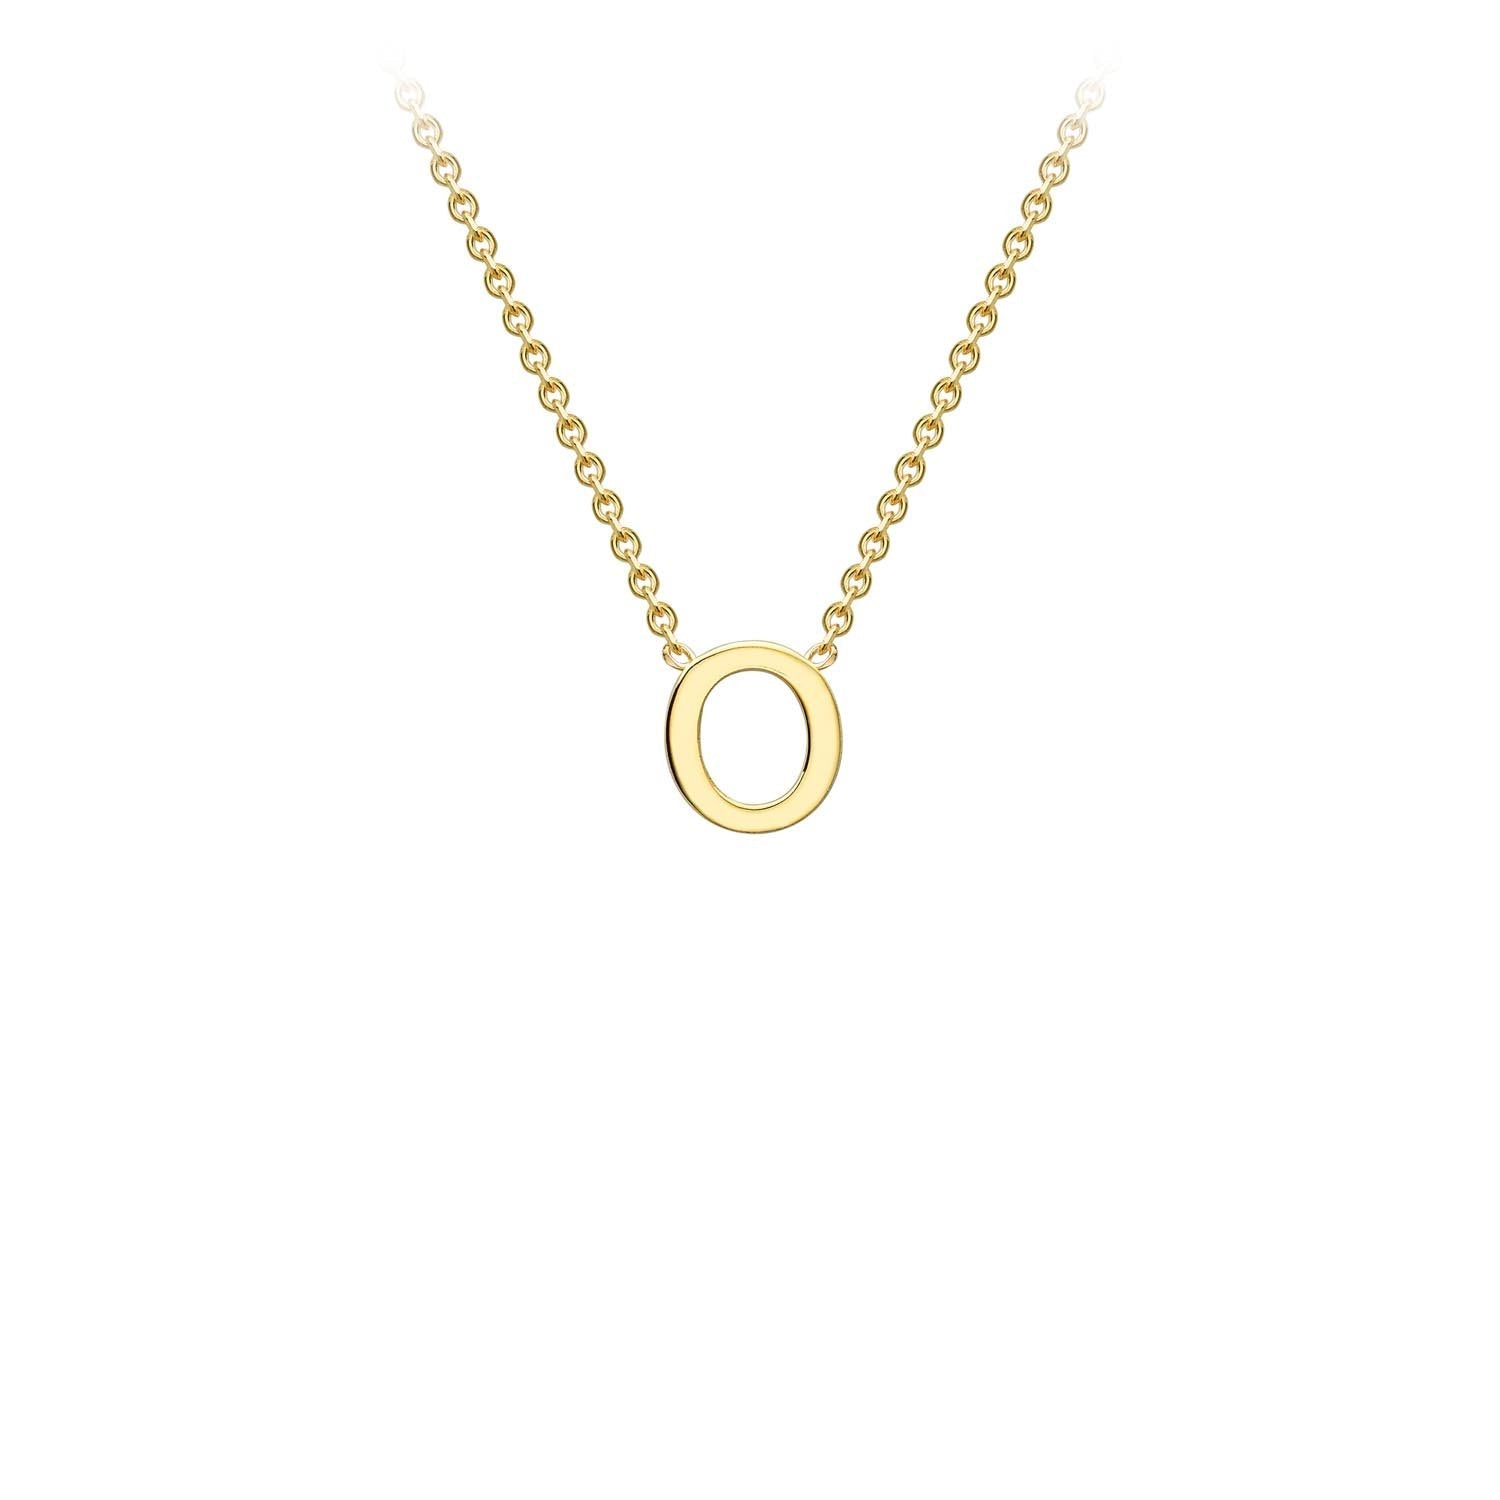 9ct Yellow Gold 'O' Petite Initial Adjustable Letter Necklace 38/43cm